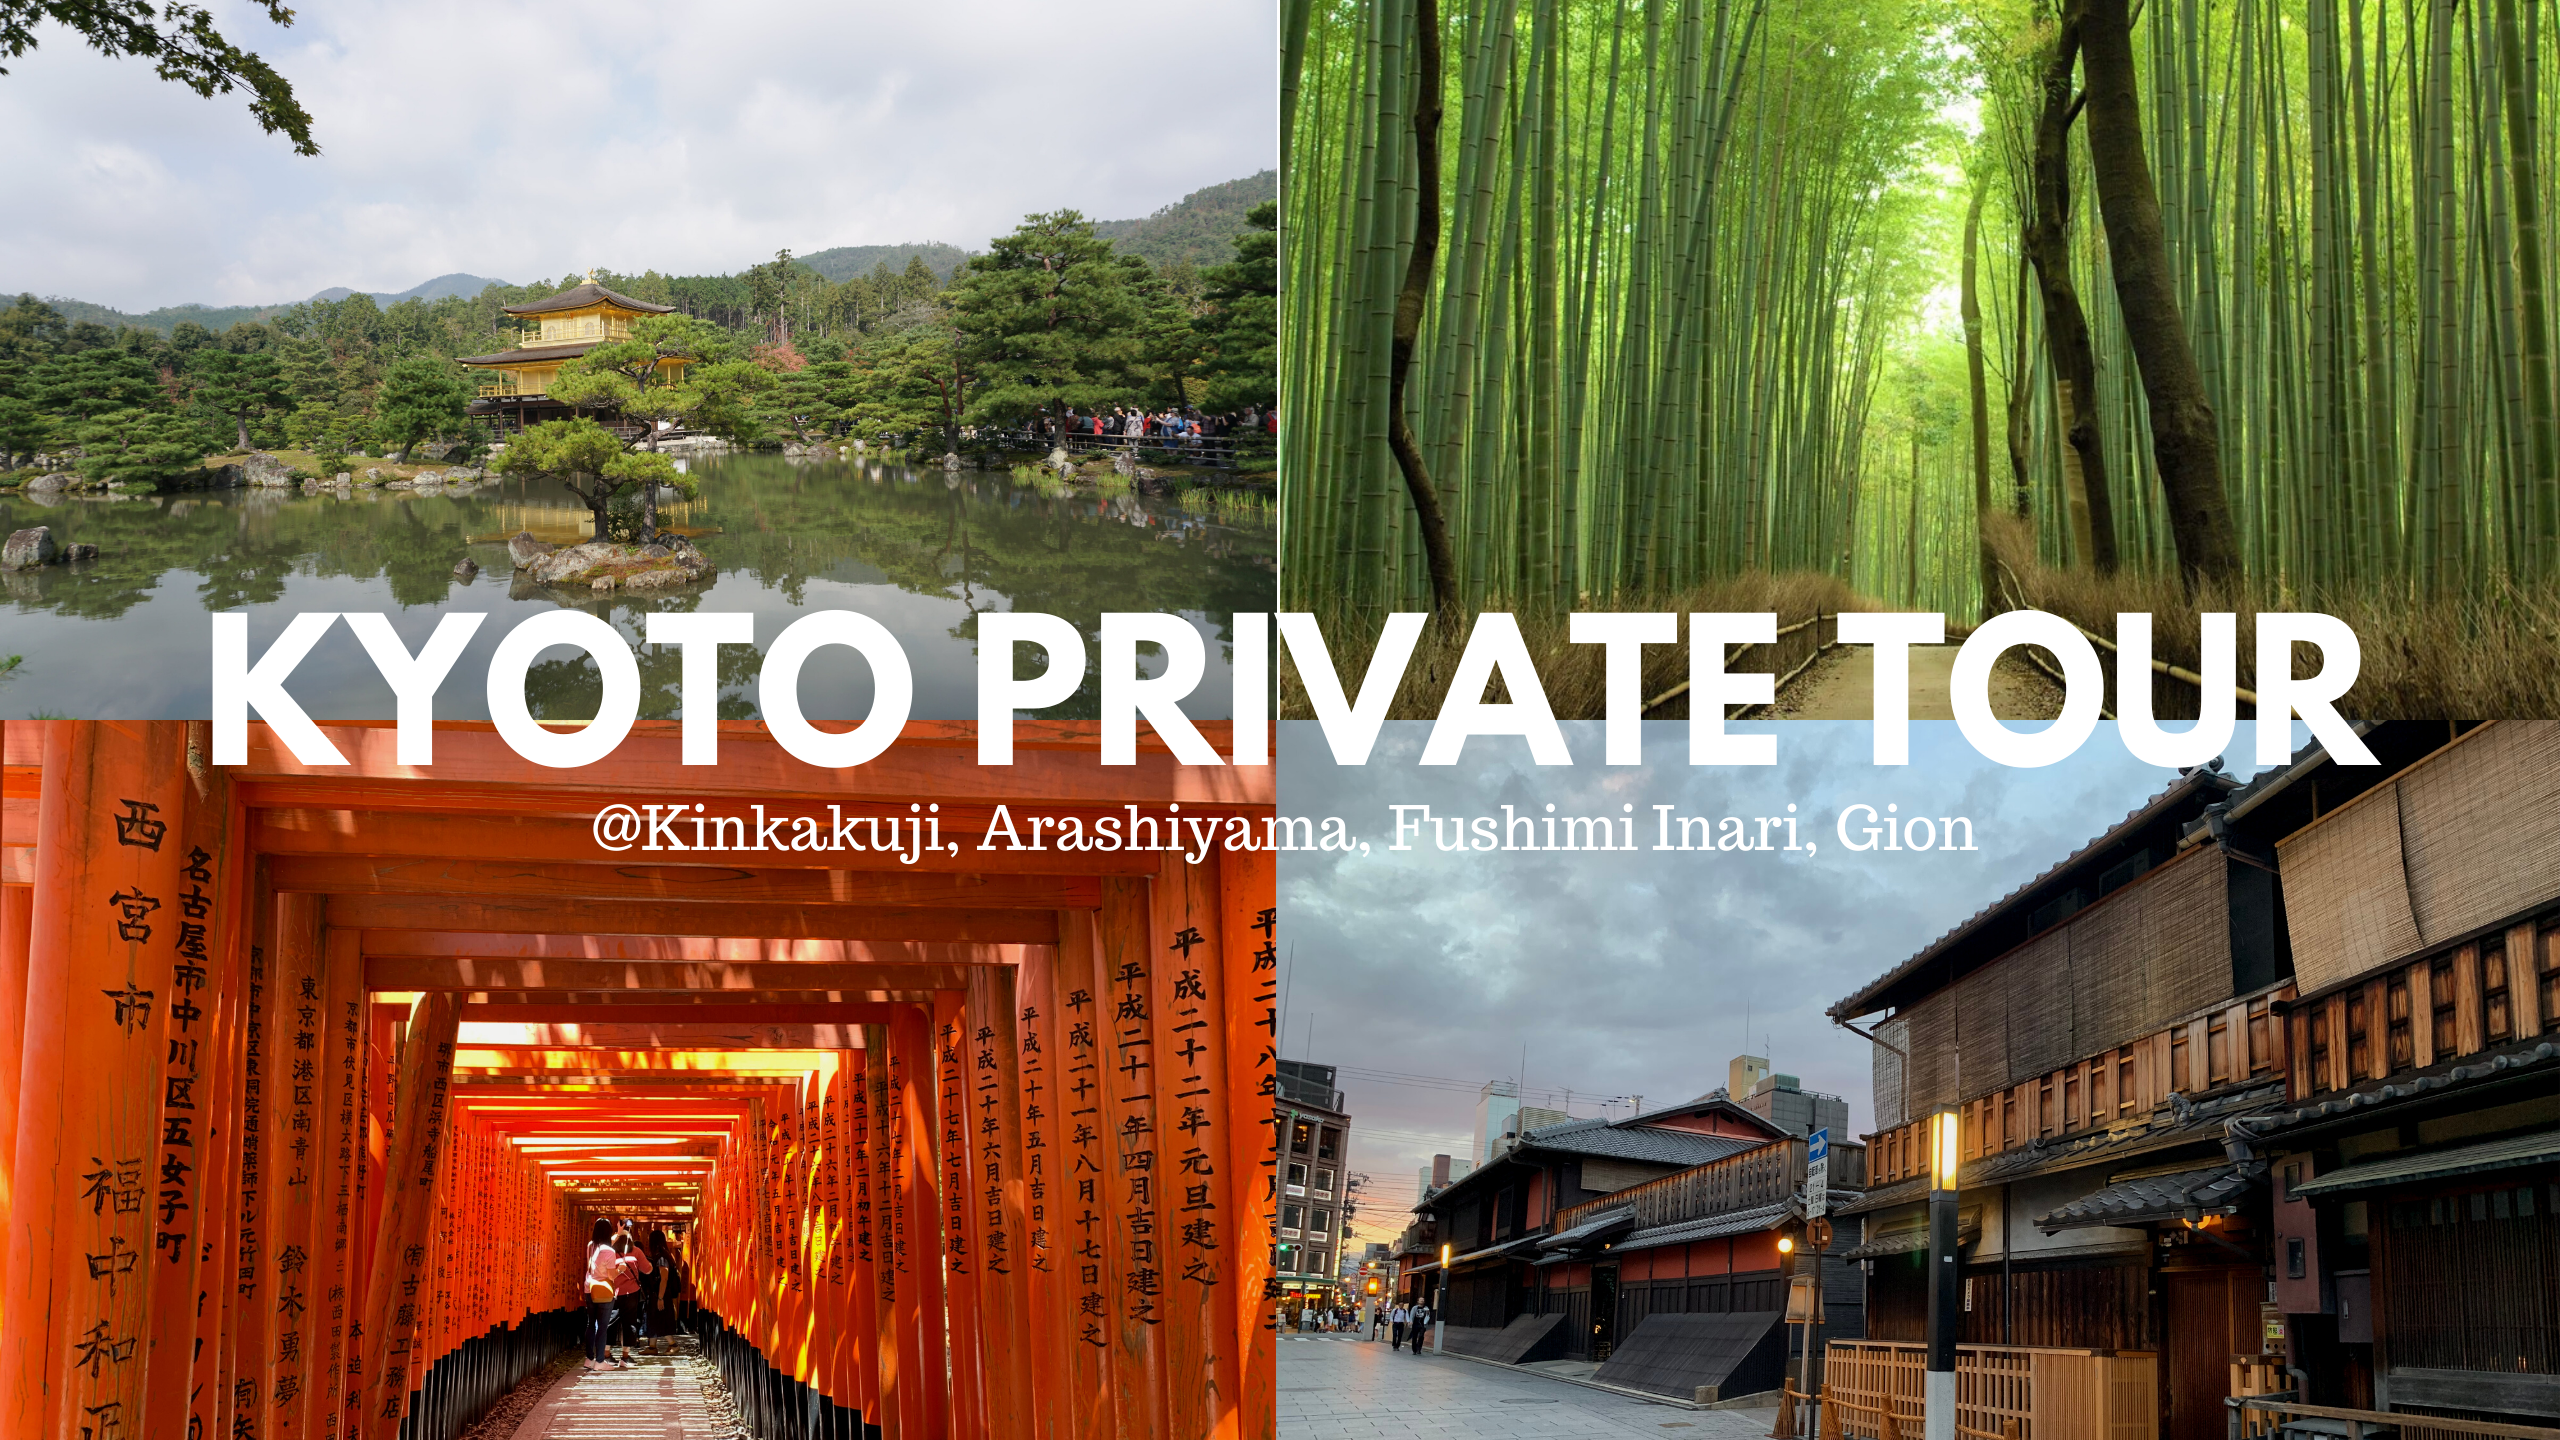 Kyoto Private Tour: the Best Highlights in Kyoto in 1 Day